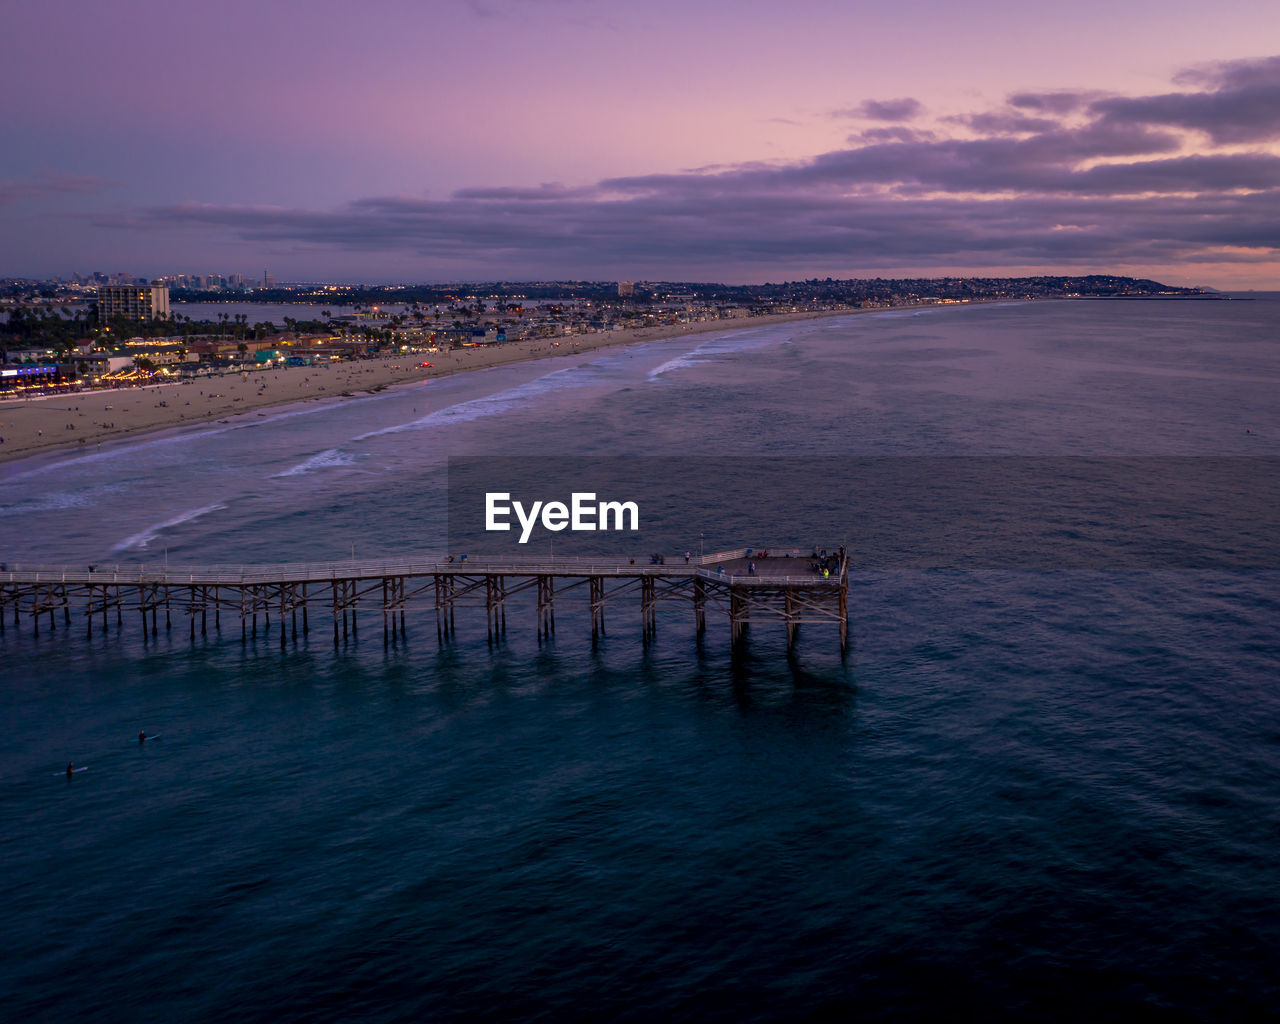 Aerial of crystal pier in pacific beach, san diego with beautiful turquoise water and purple sky